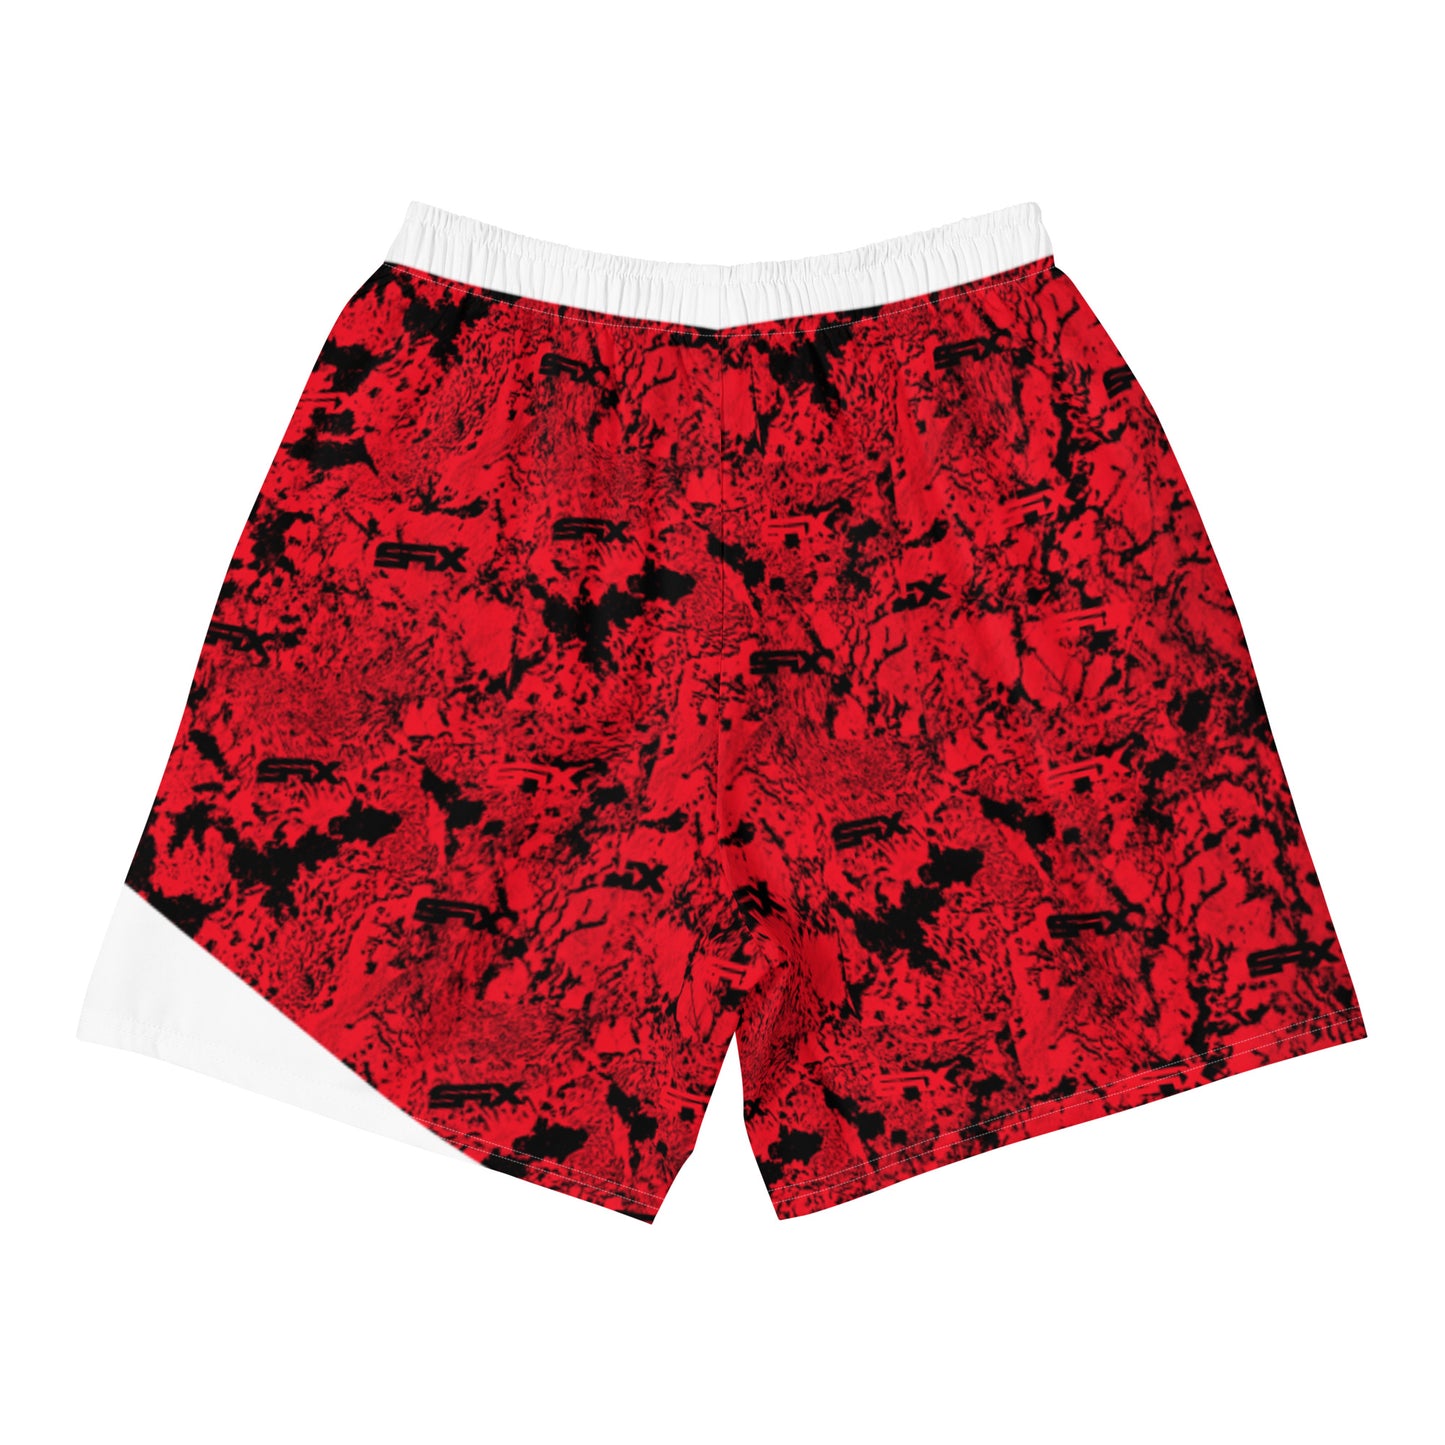 SFX RED TIGER SHORTS